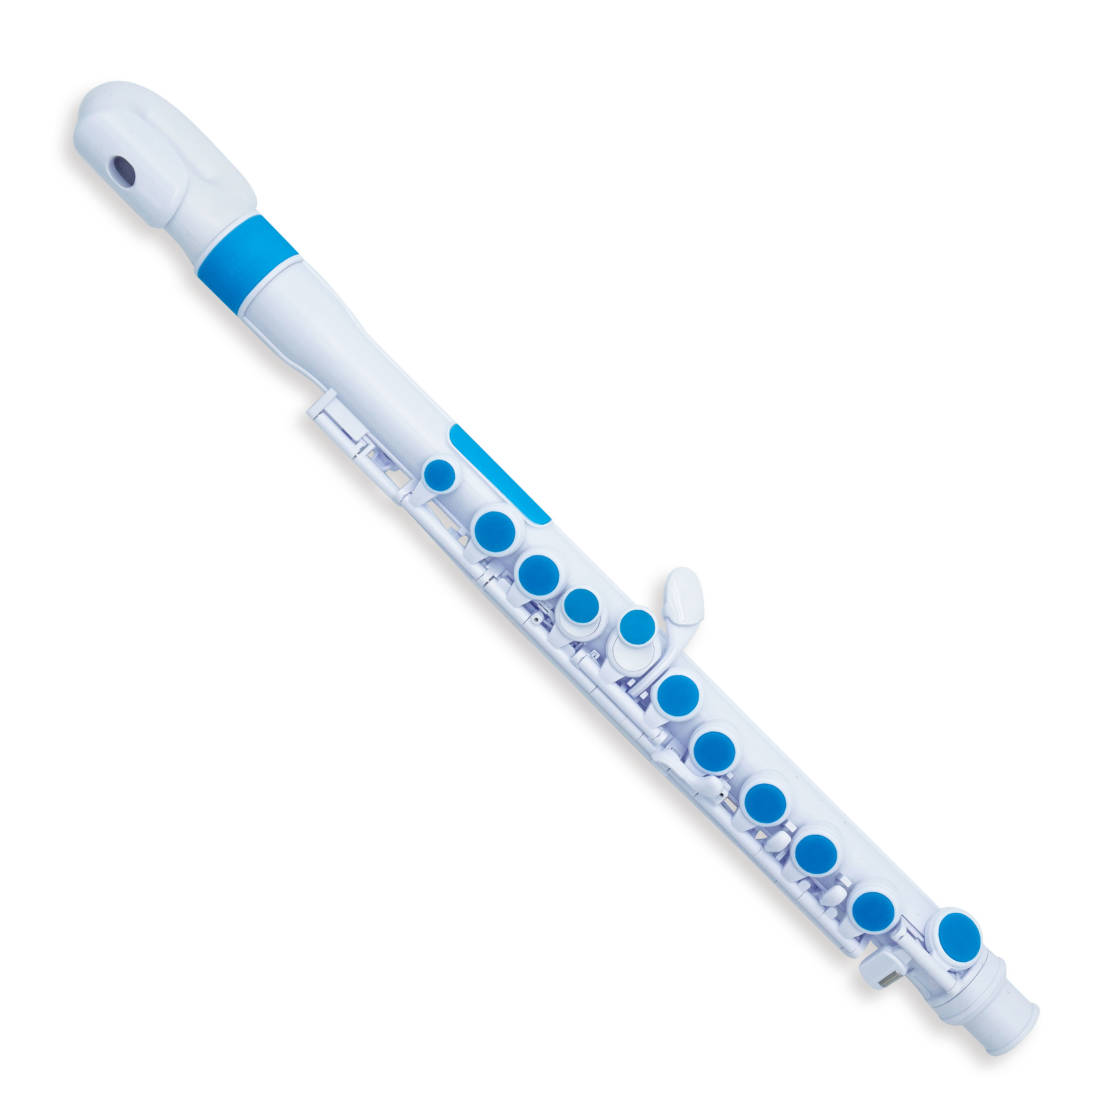 jFlute 2.0 Kit with Donut Head Joint - White/Blue